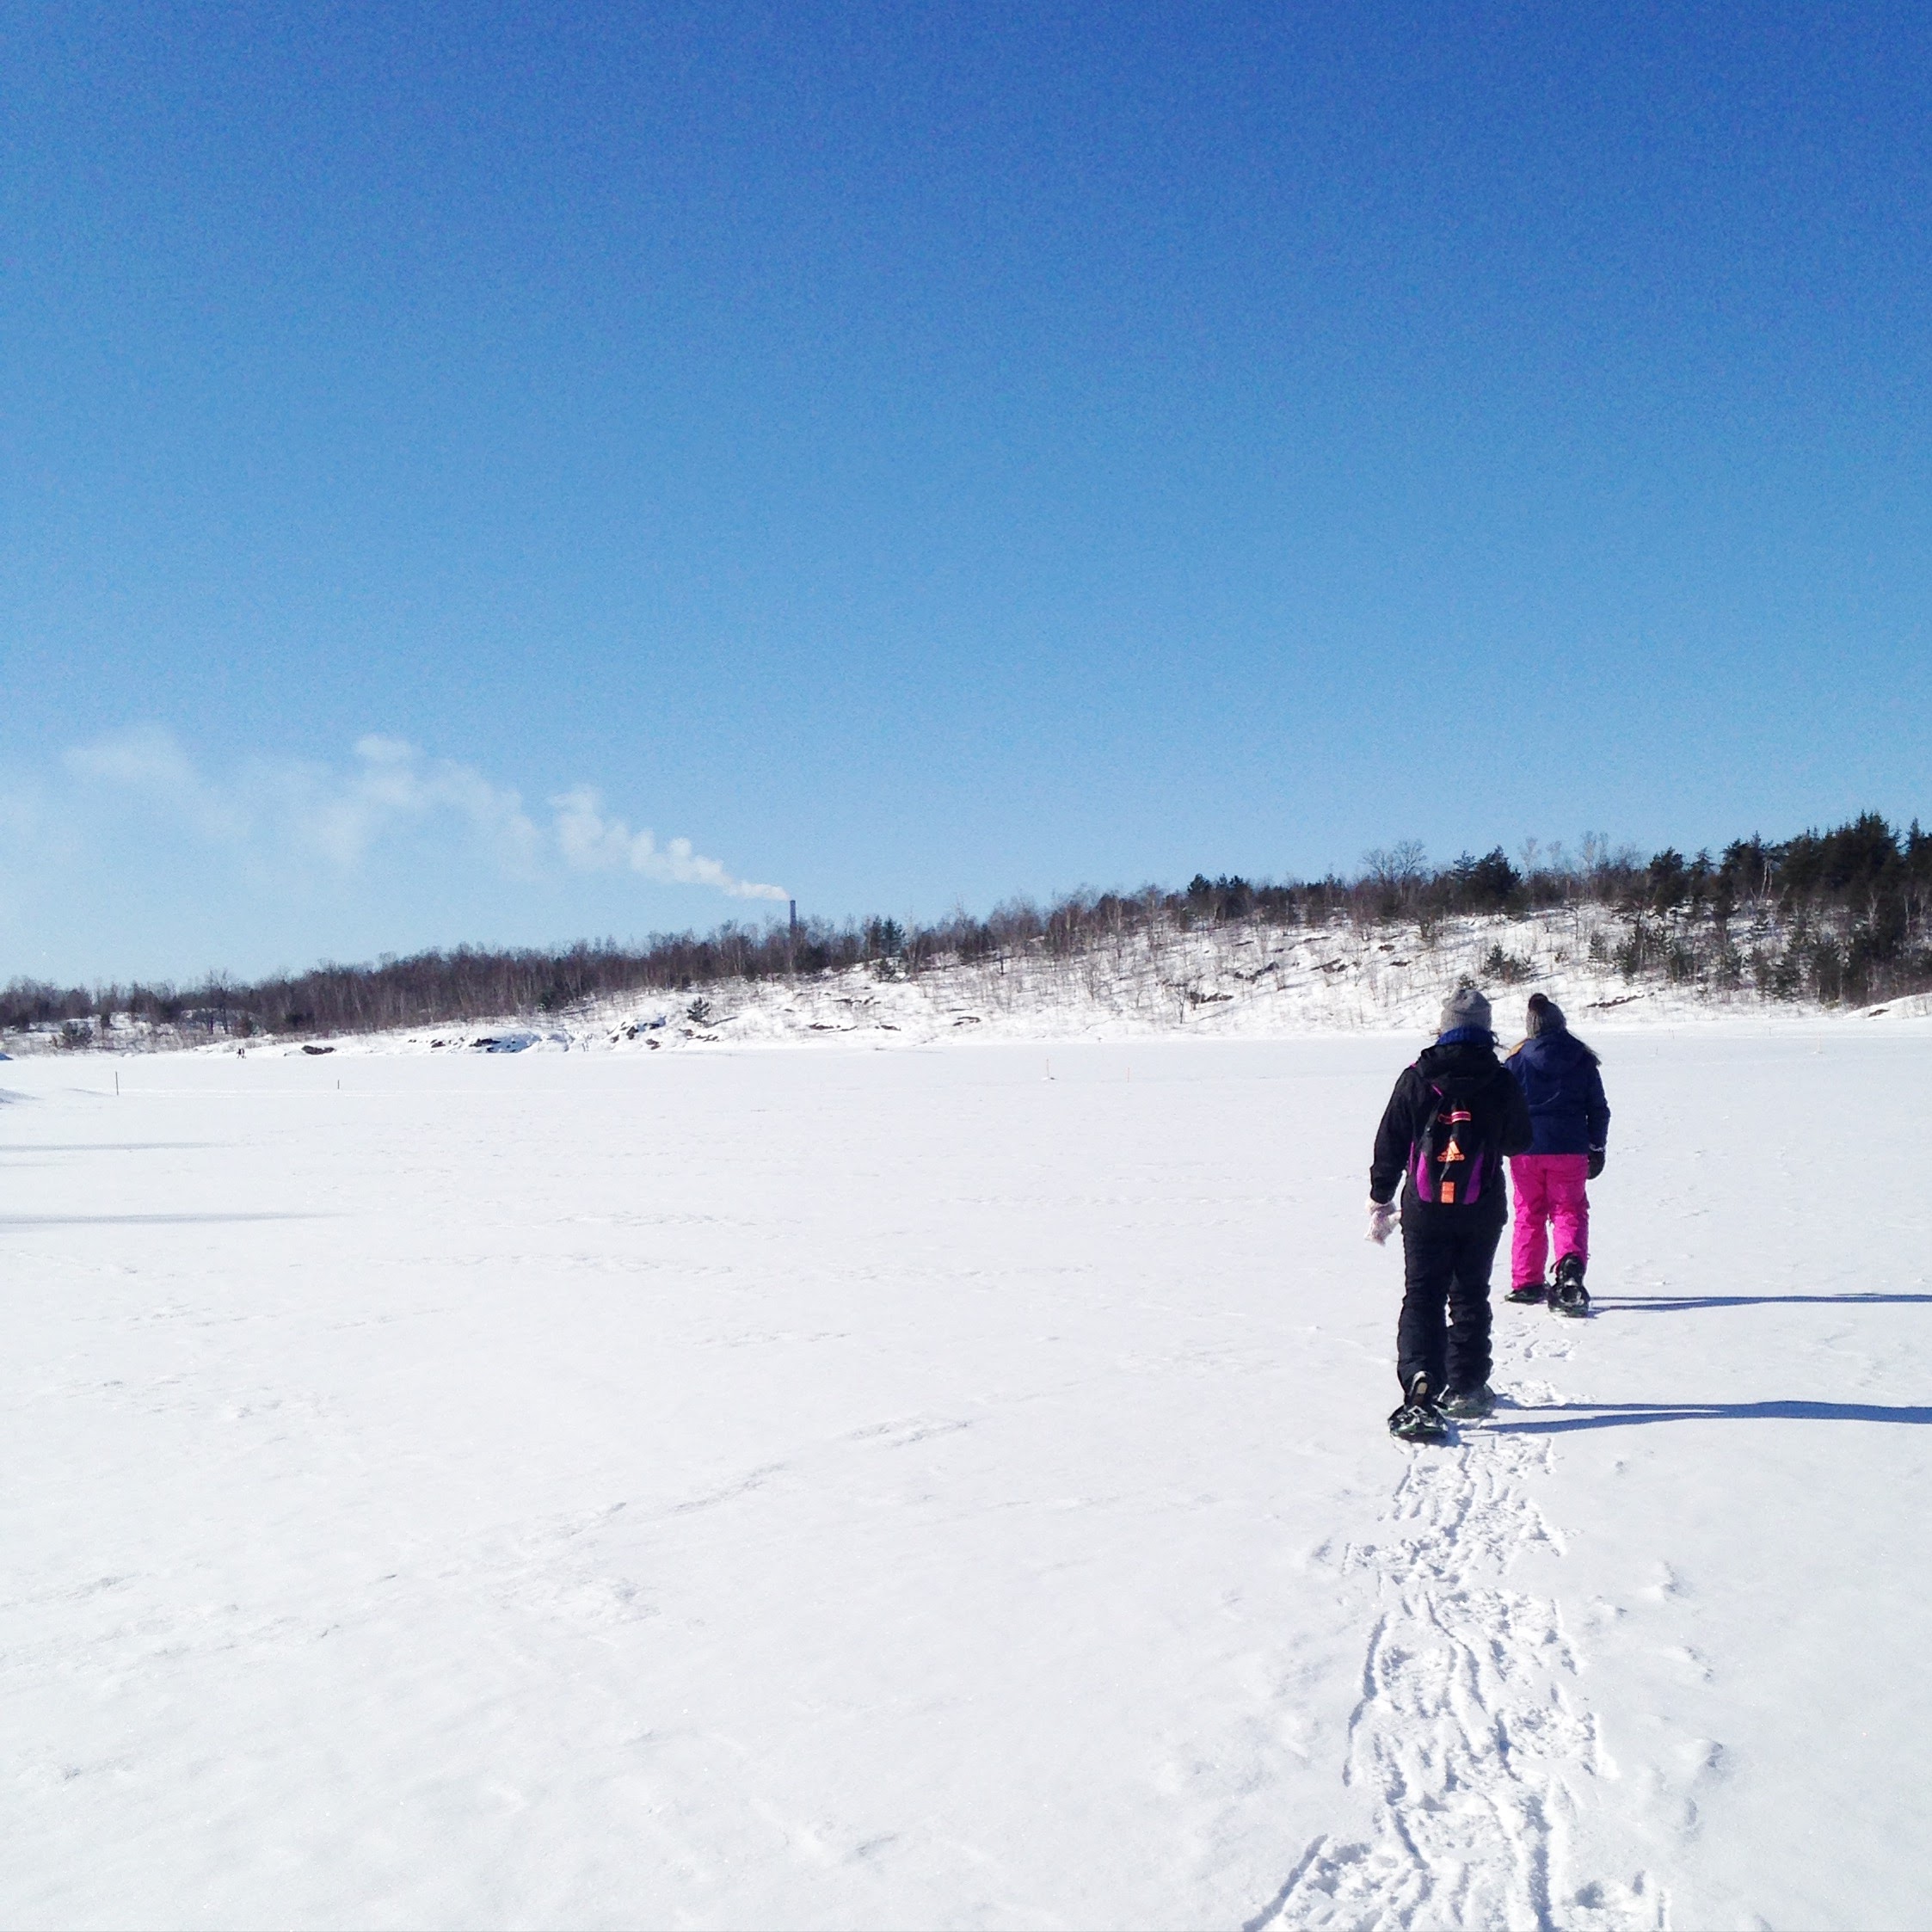 Top Five ways to live winter to the fullest in Sudbury